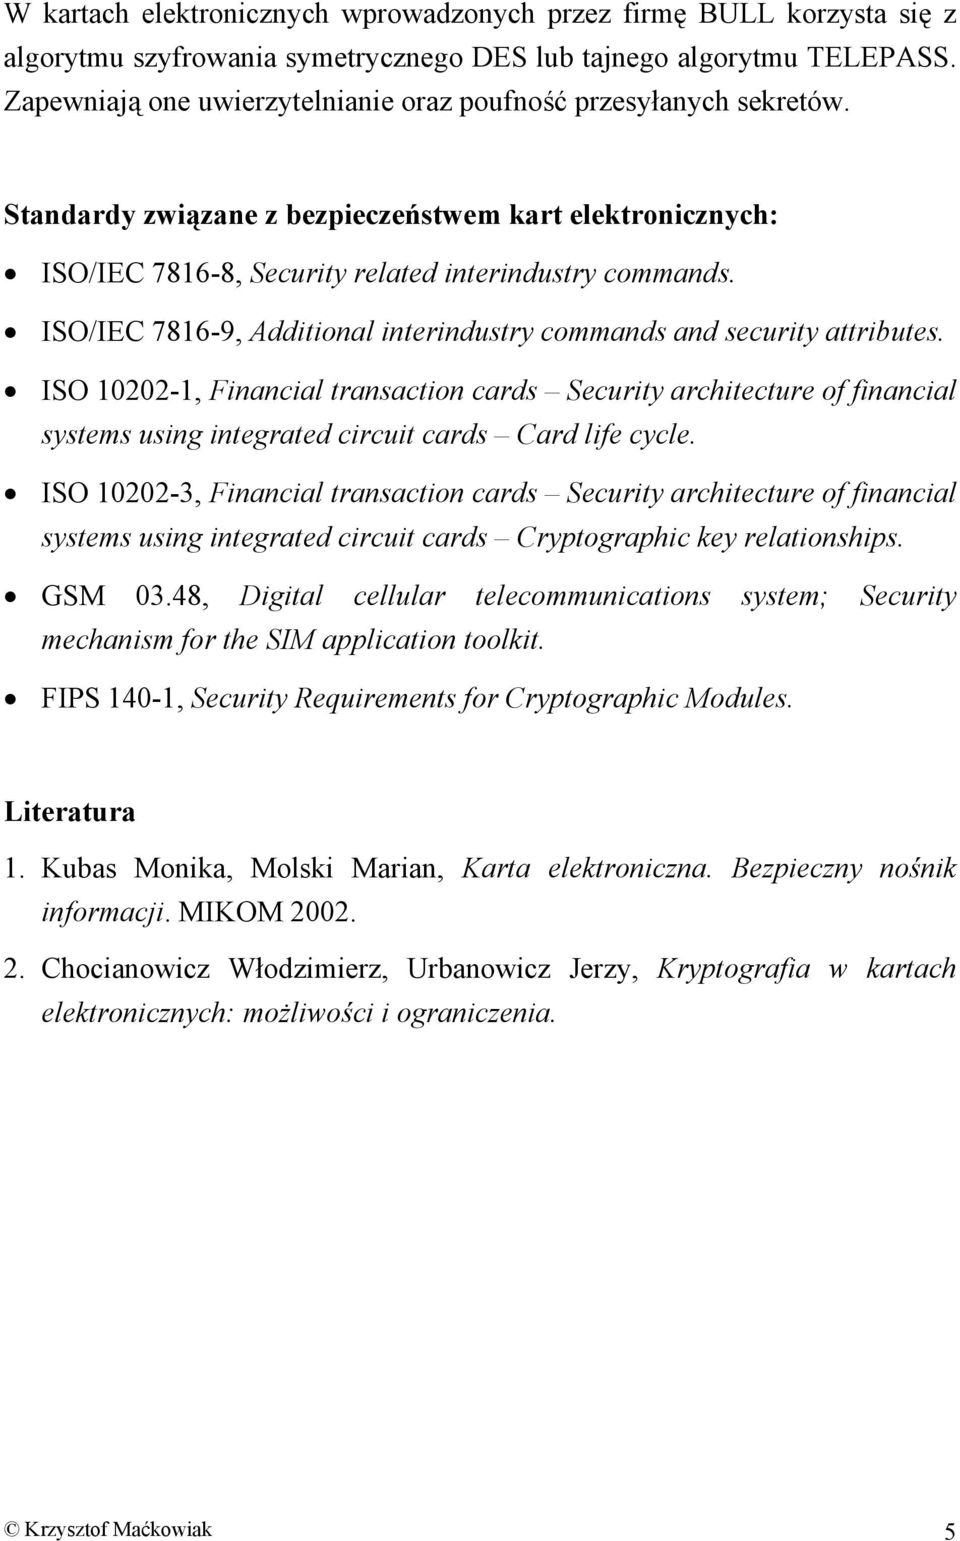 ISO/IEC 7816-9, Additional interindustry commands and security attributes.